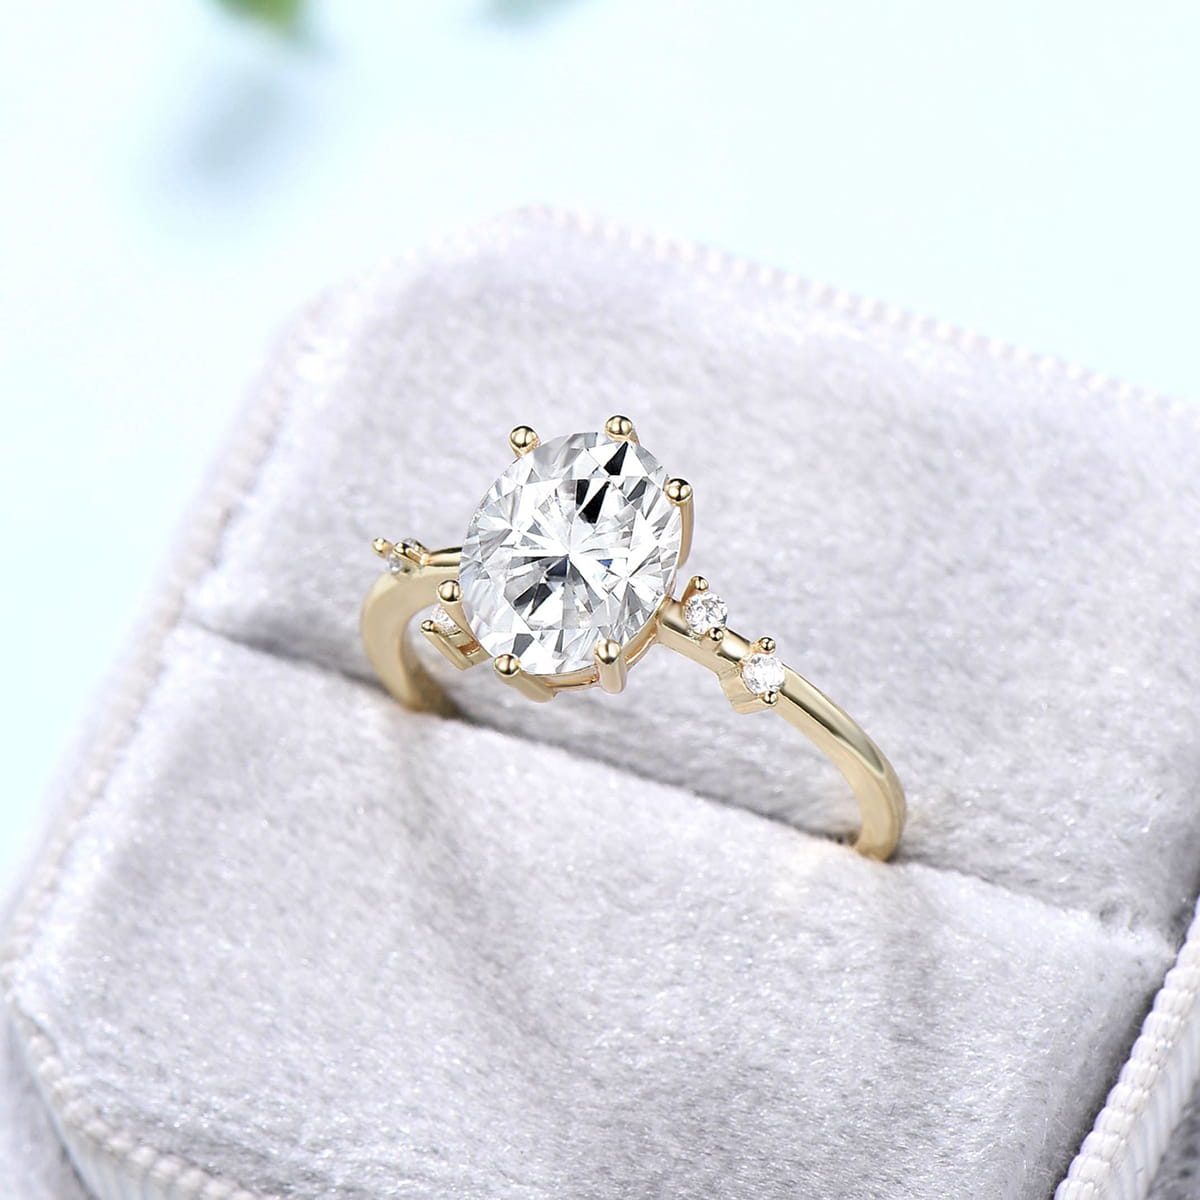 Dainty Oval cut moissanite engagement ring solid 14k yellow gold Minimalist 6 prongs cluster diamond promise wedding ring women jewelry gift - PENFINE